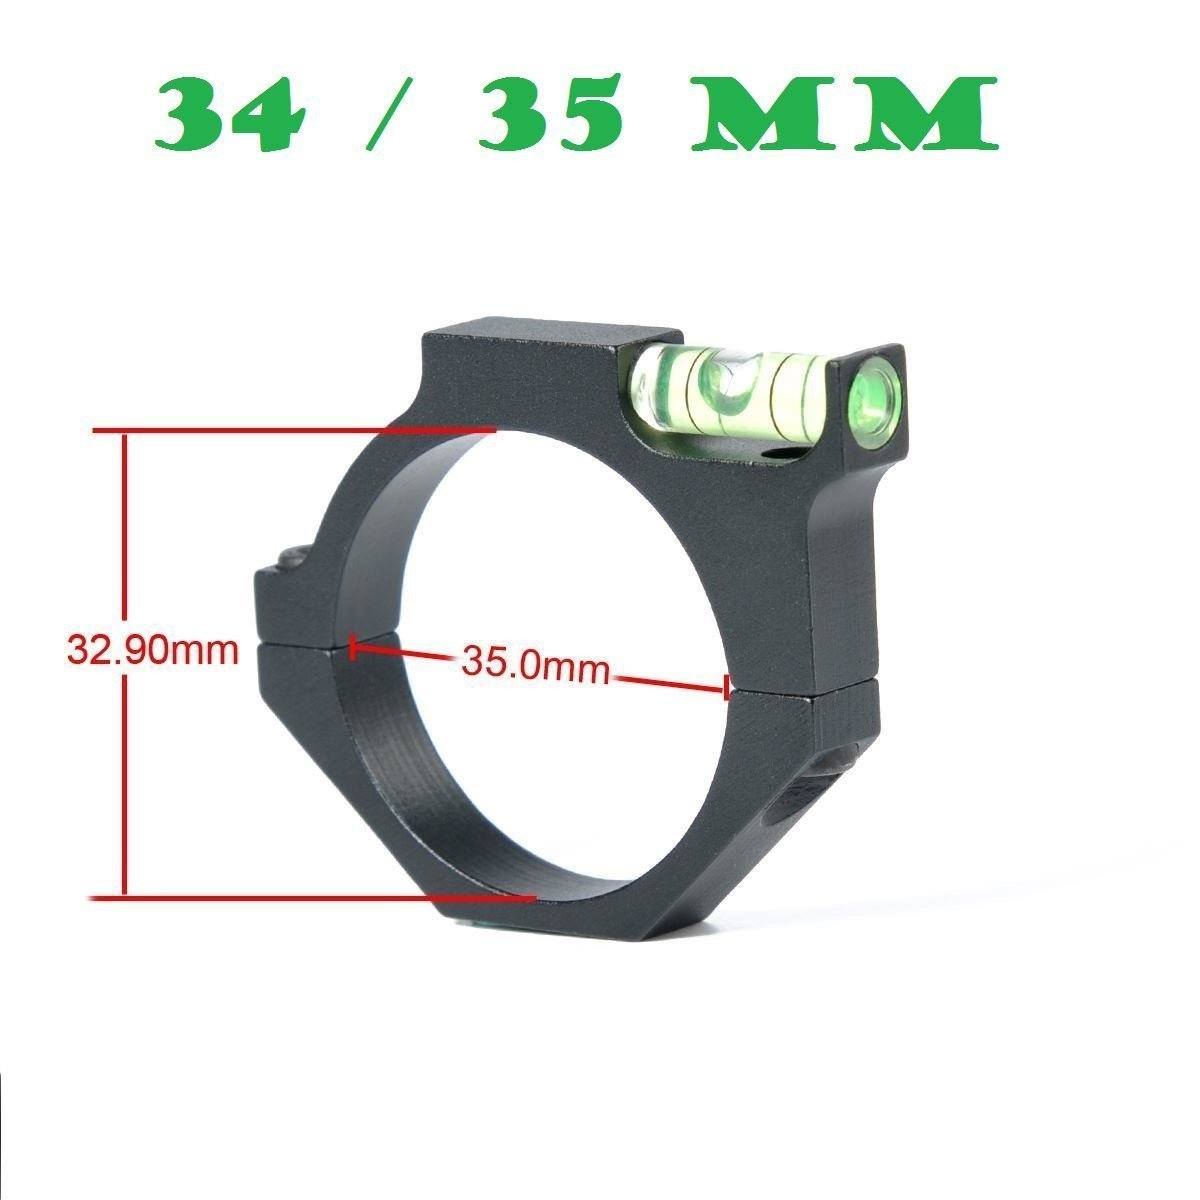 34/35mm Anti-Cant Rifle Scope Tubes Bubble Level for 34 and 35mm Scope Rings Scope Mounts & Accessories Green Blob Outdoors 